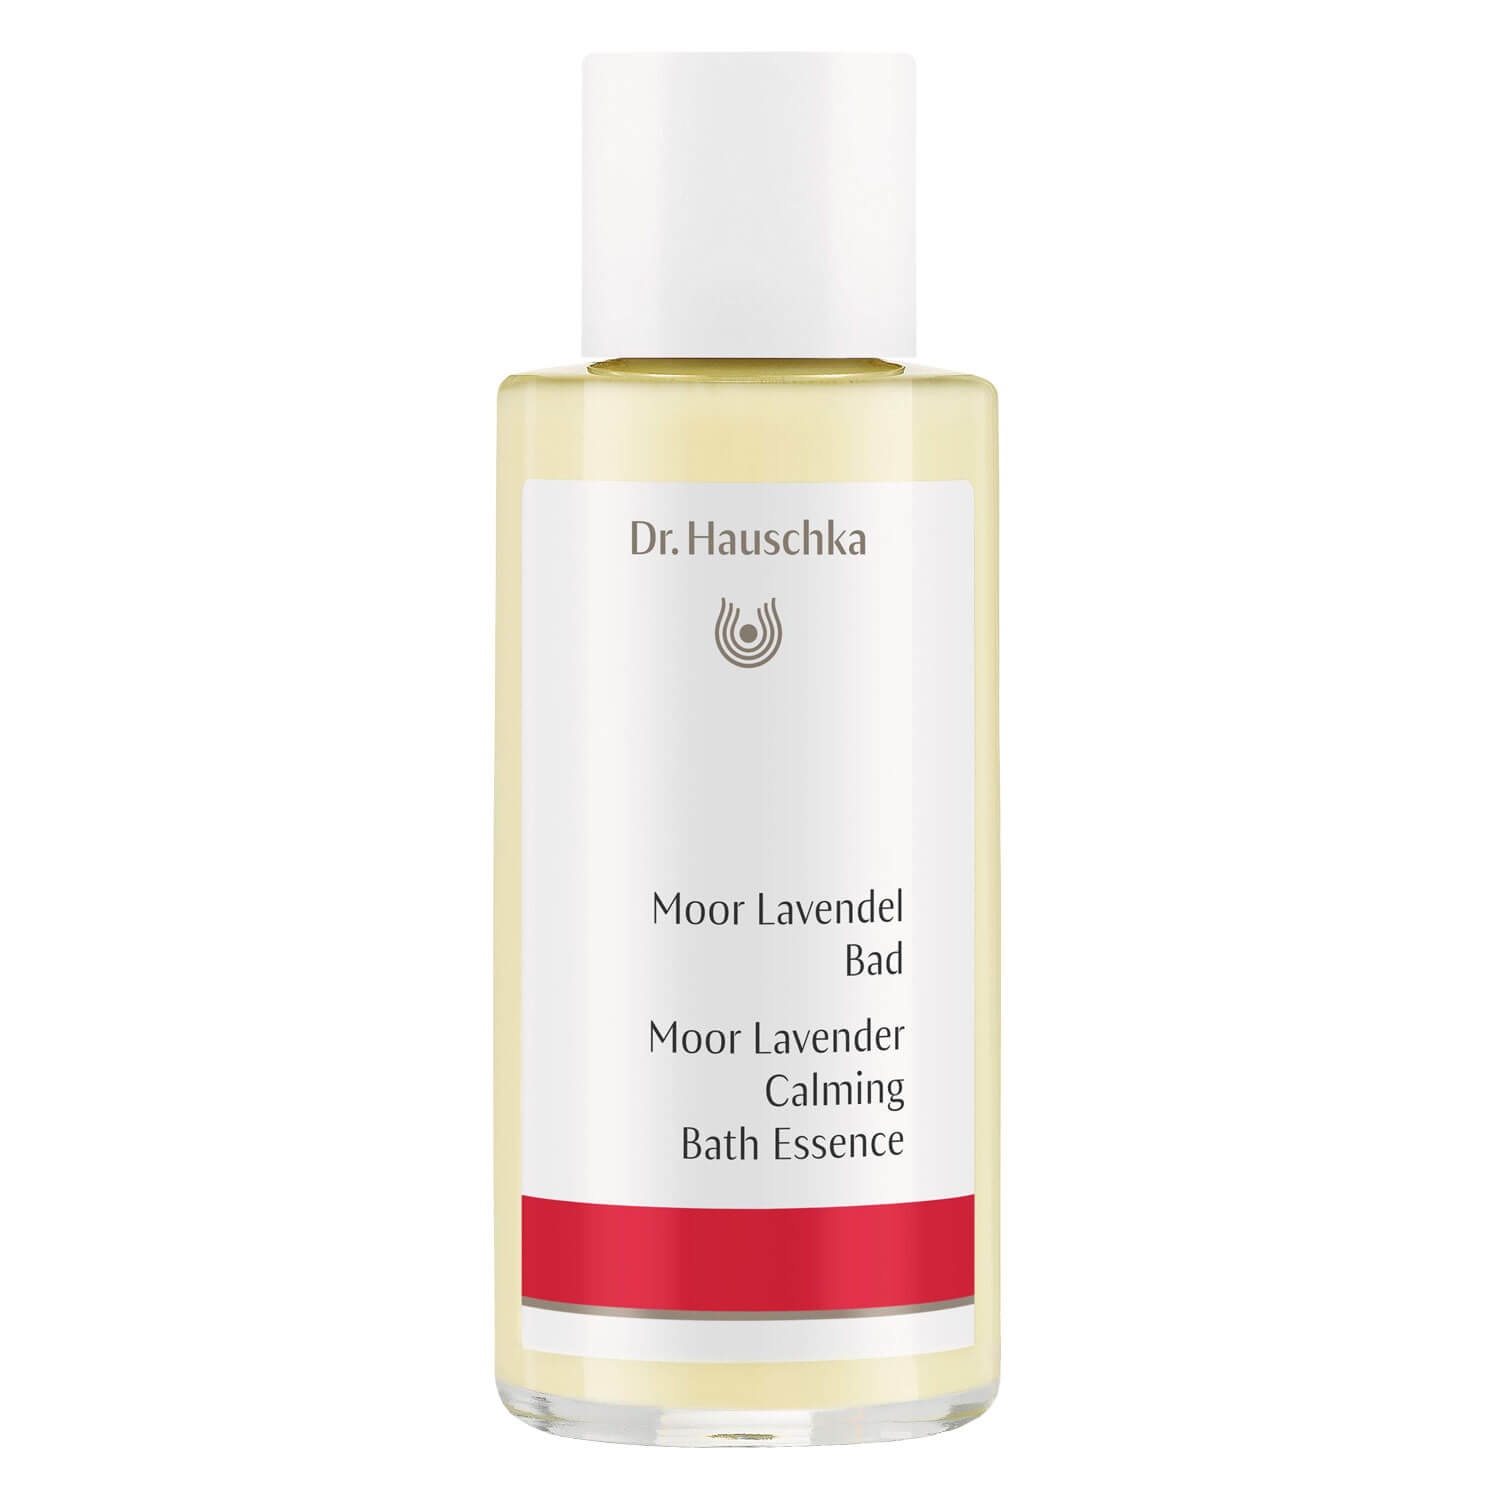 Product image from Dr. Hauschka - Moor Lavendel Bad